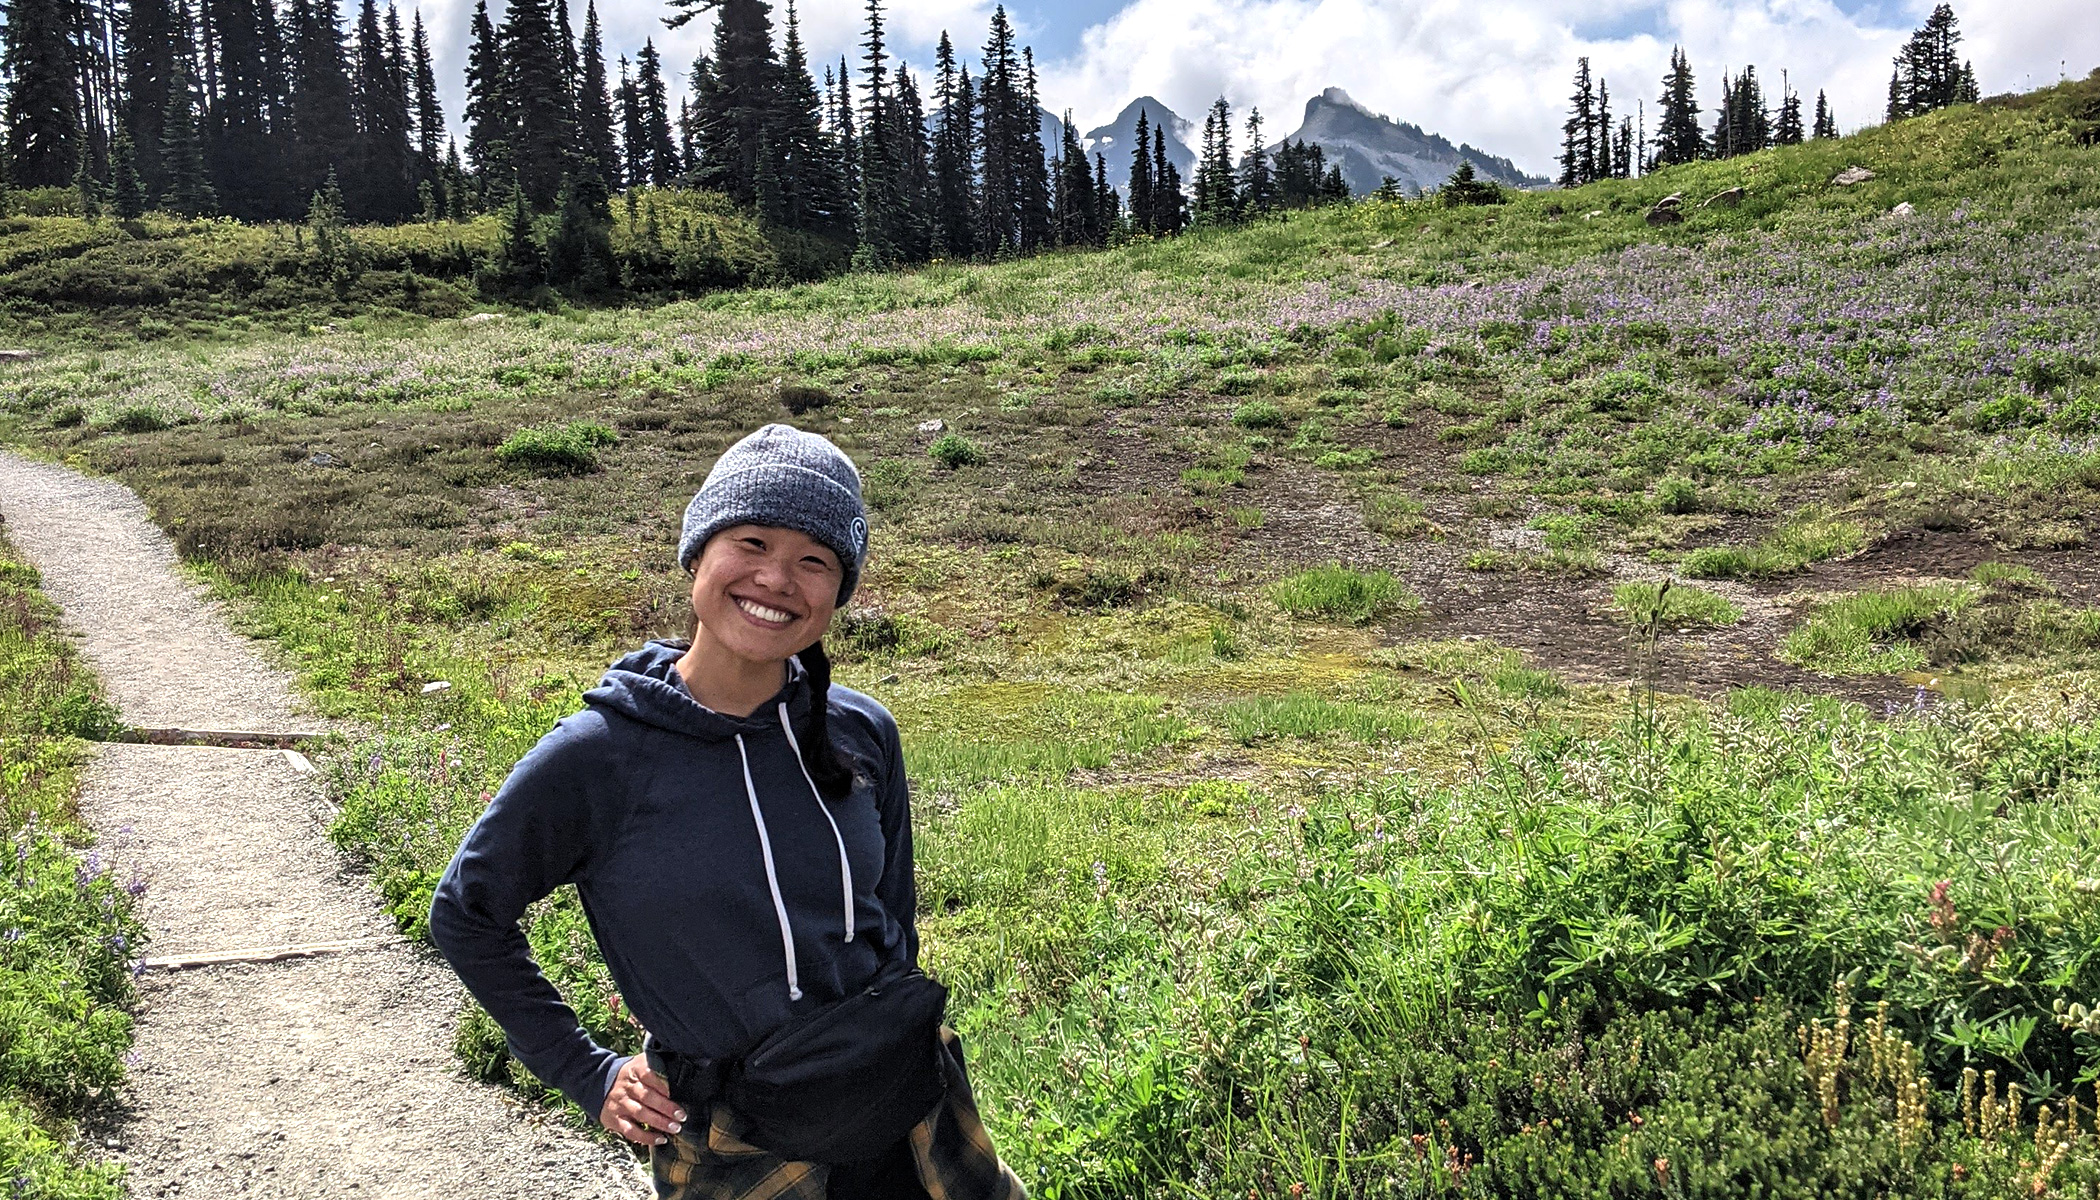 CZI housing affordability manager Michelle smiles as she stands on a trail, surrounded by greenery. You can see the mountains deep in the background.